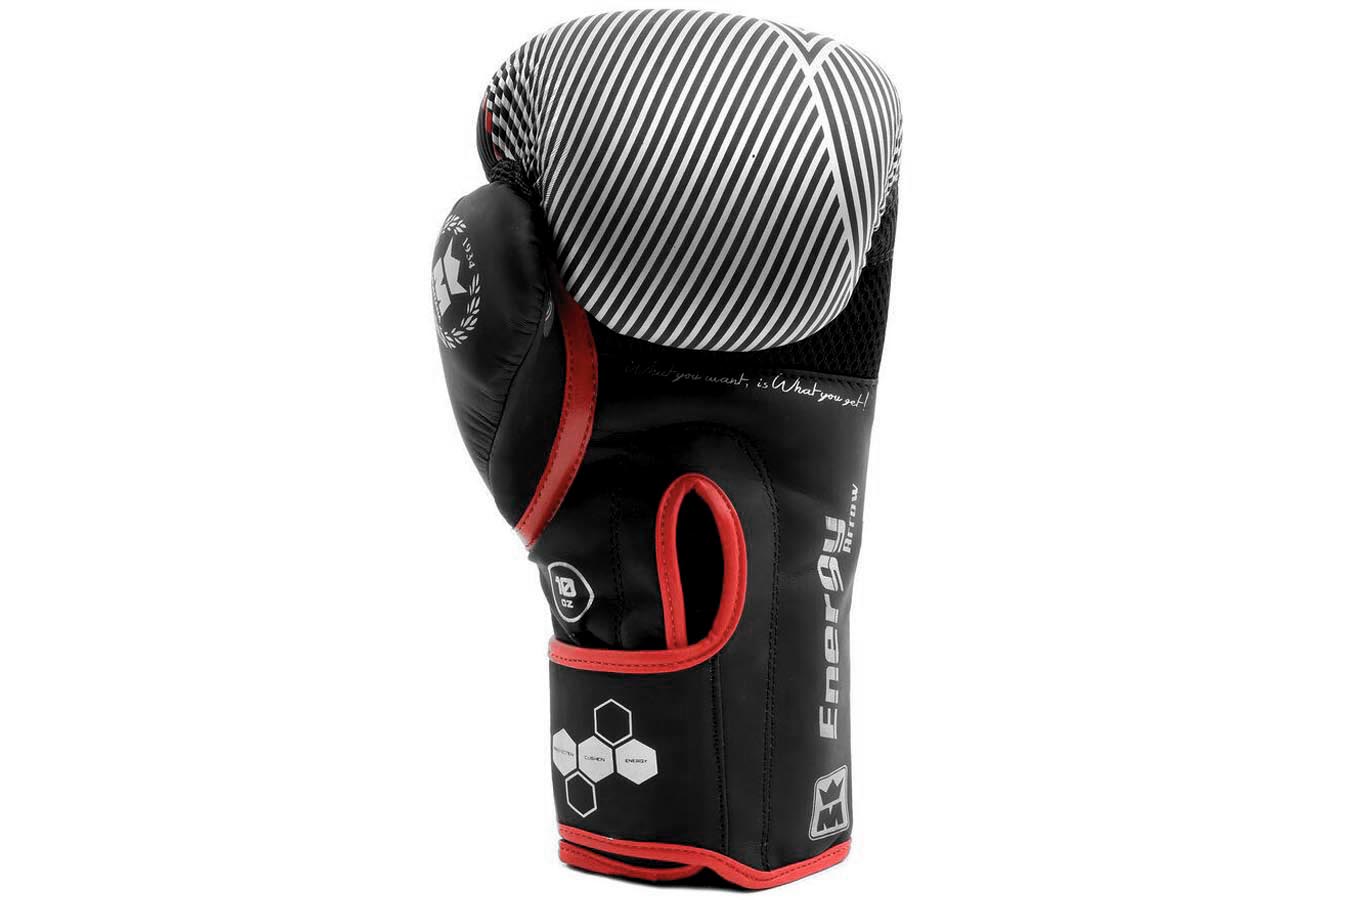 Boxing & Fitness gloves - Ladyfit, Montana